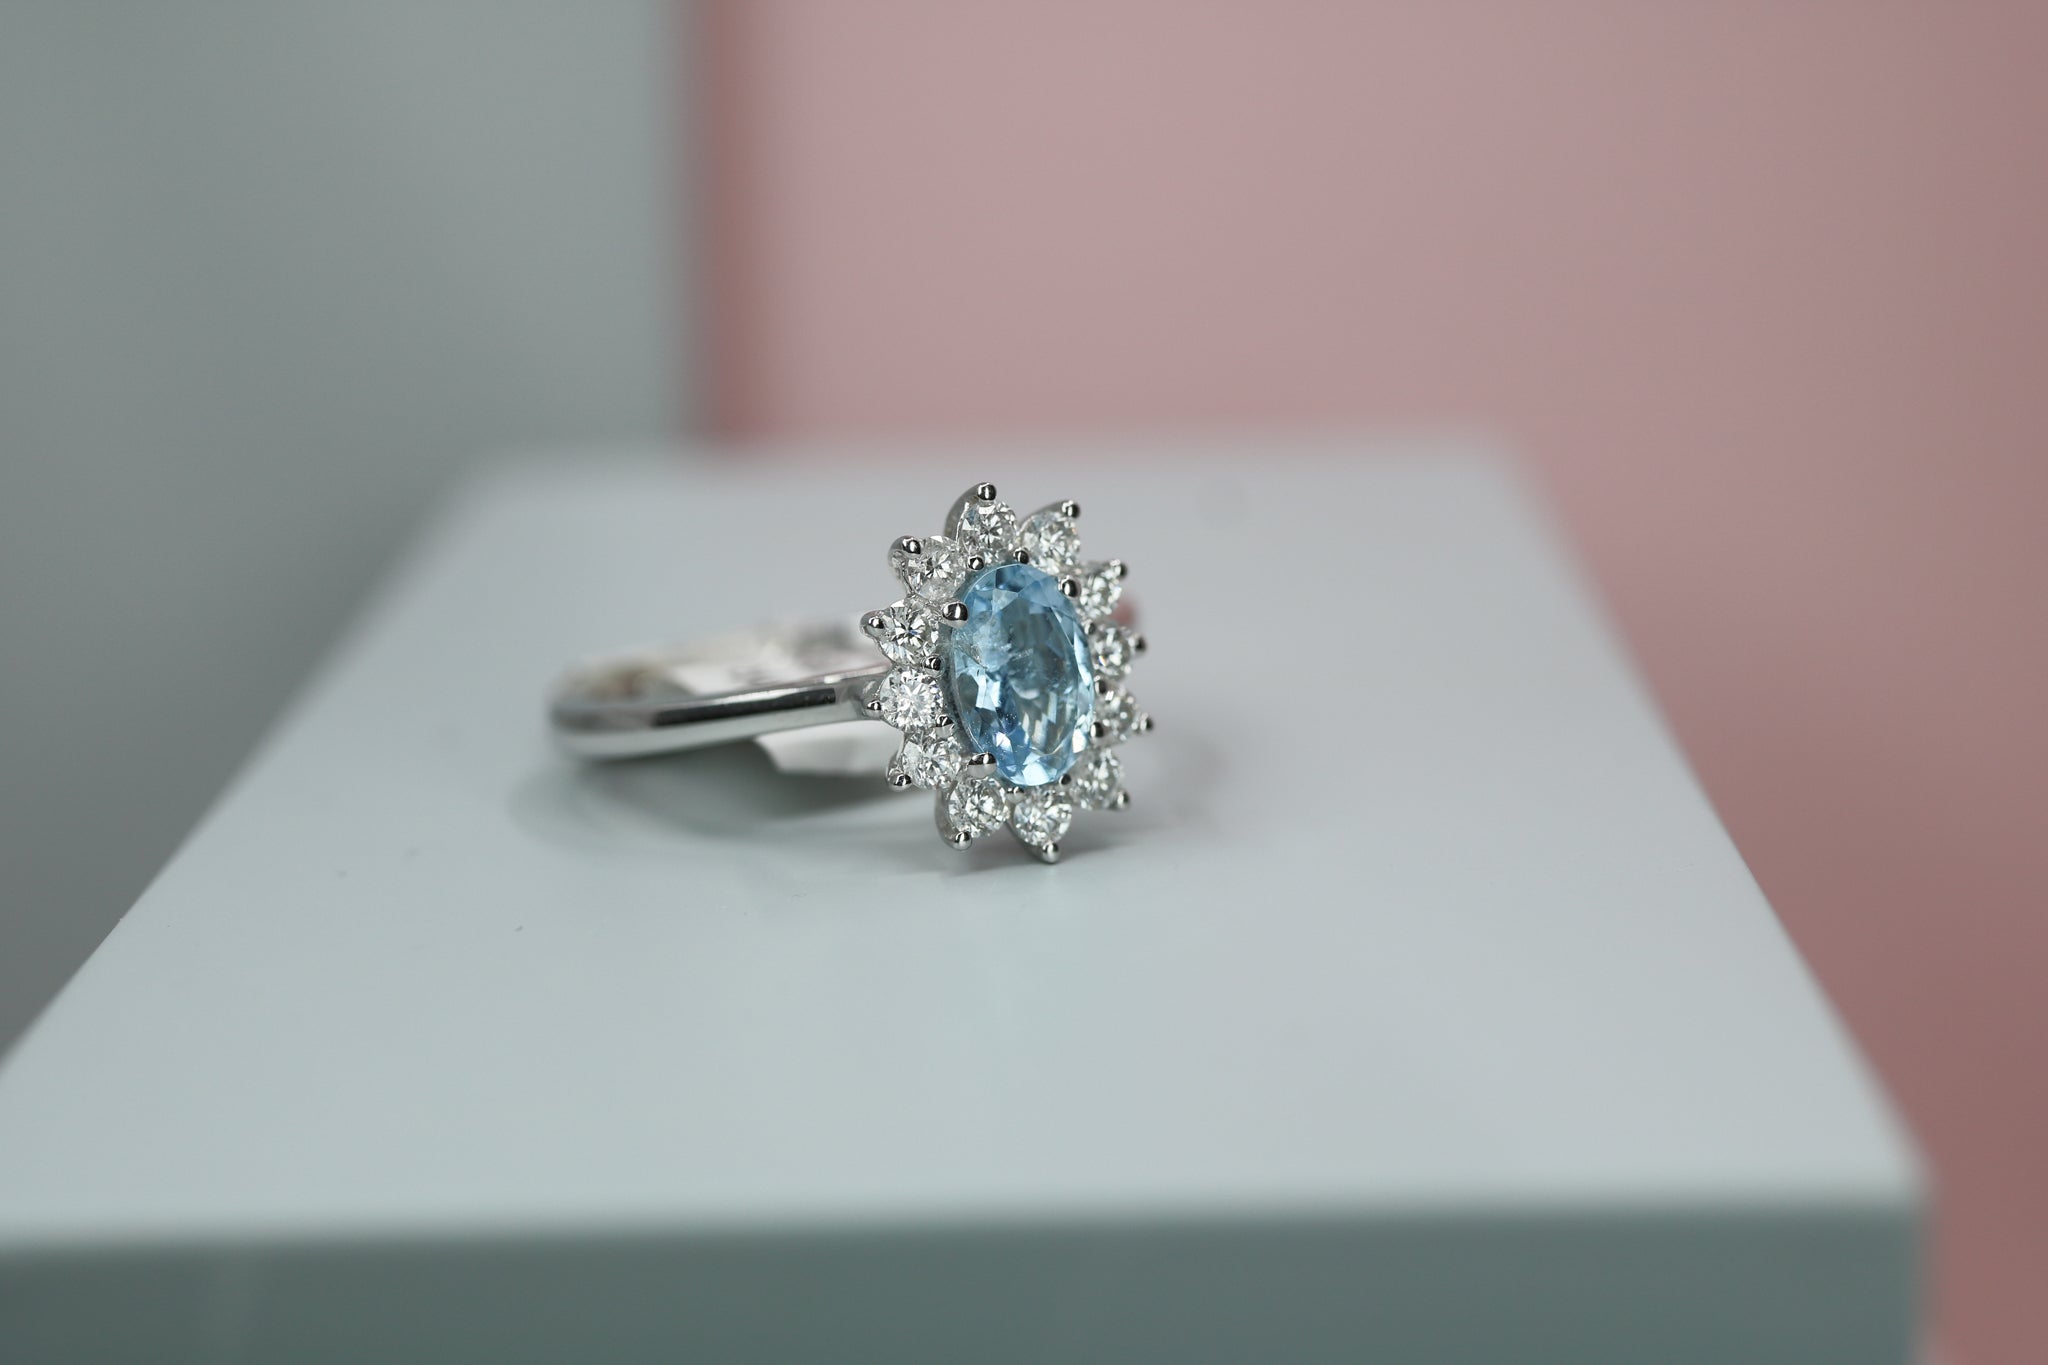 18ct White Gold Diamond & Aquamarine Cluster Ring - HJ2075 - Hallmark Jewellers Formby & The Jewellers Bench Widnes